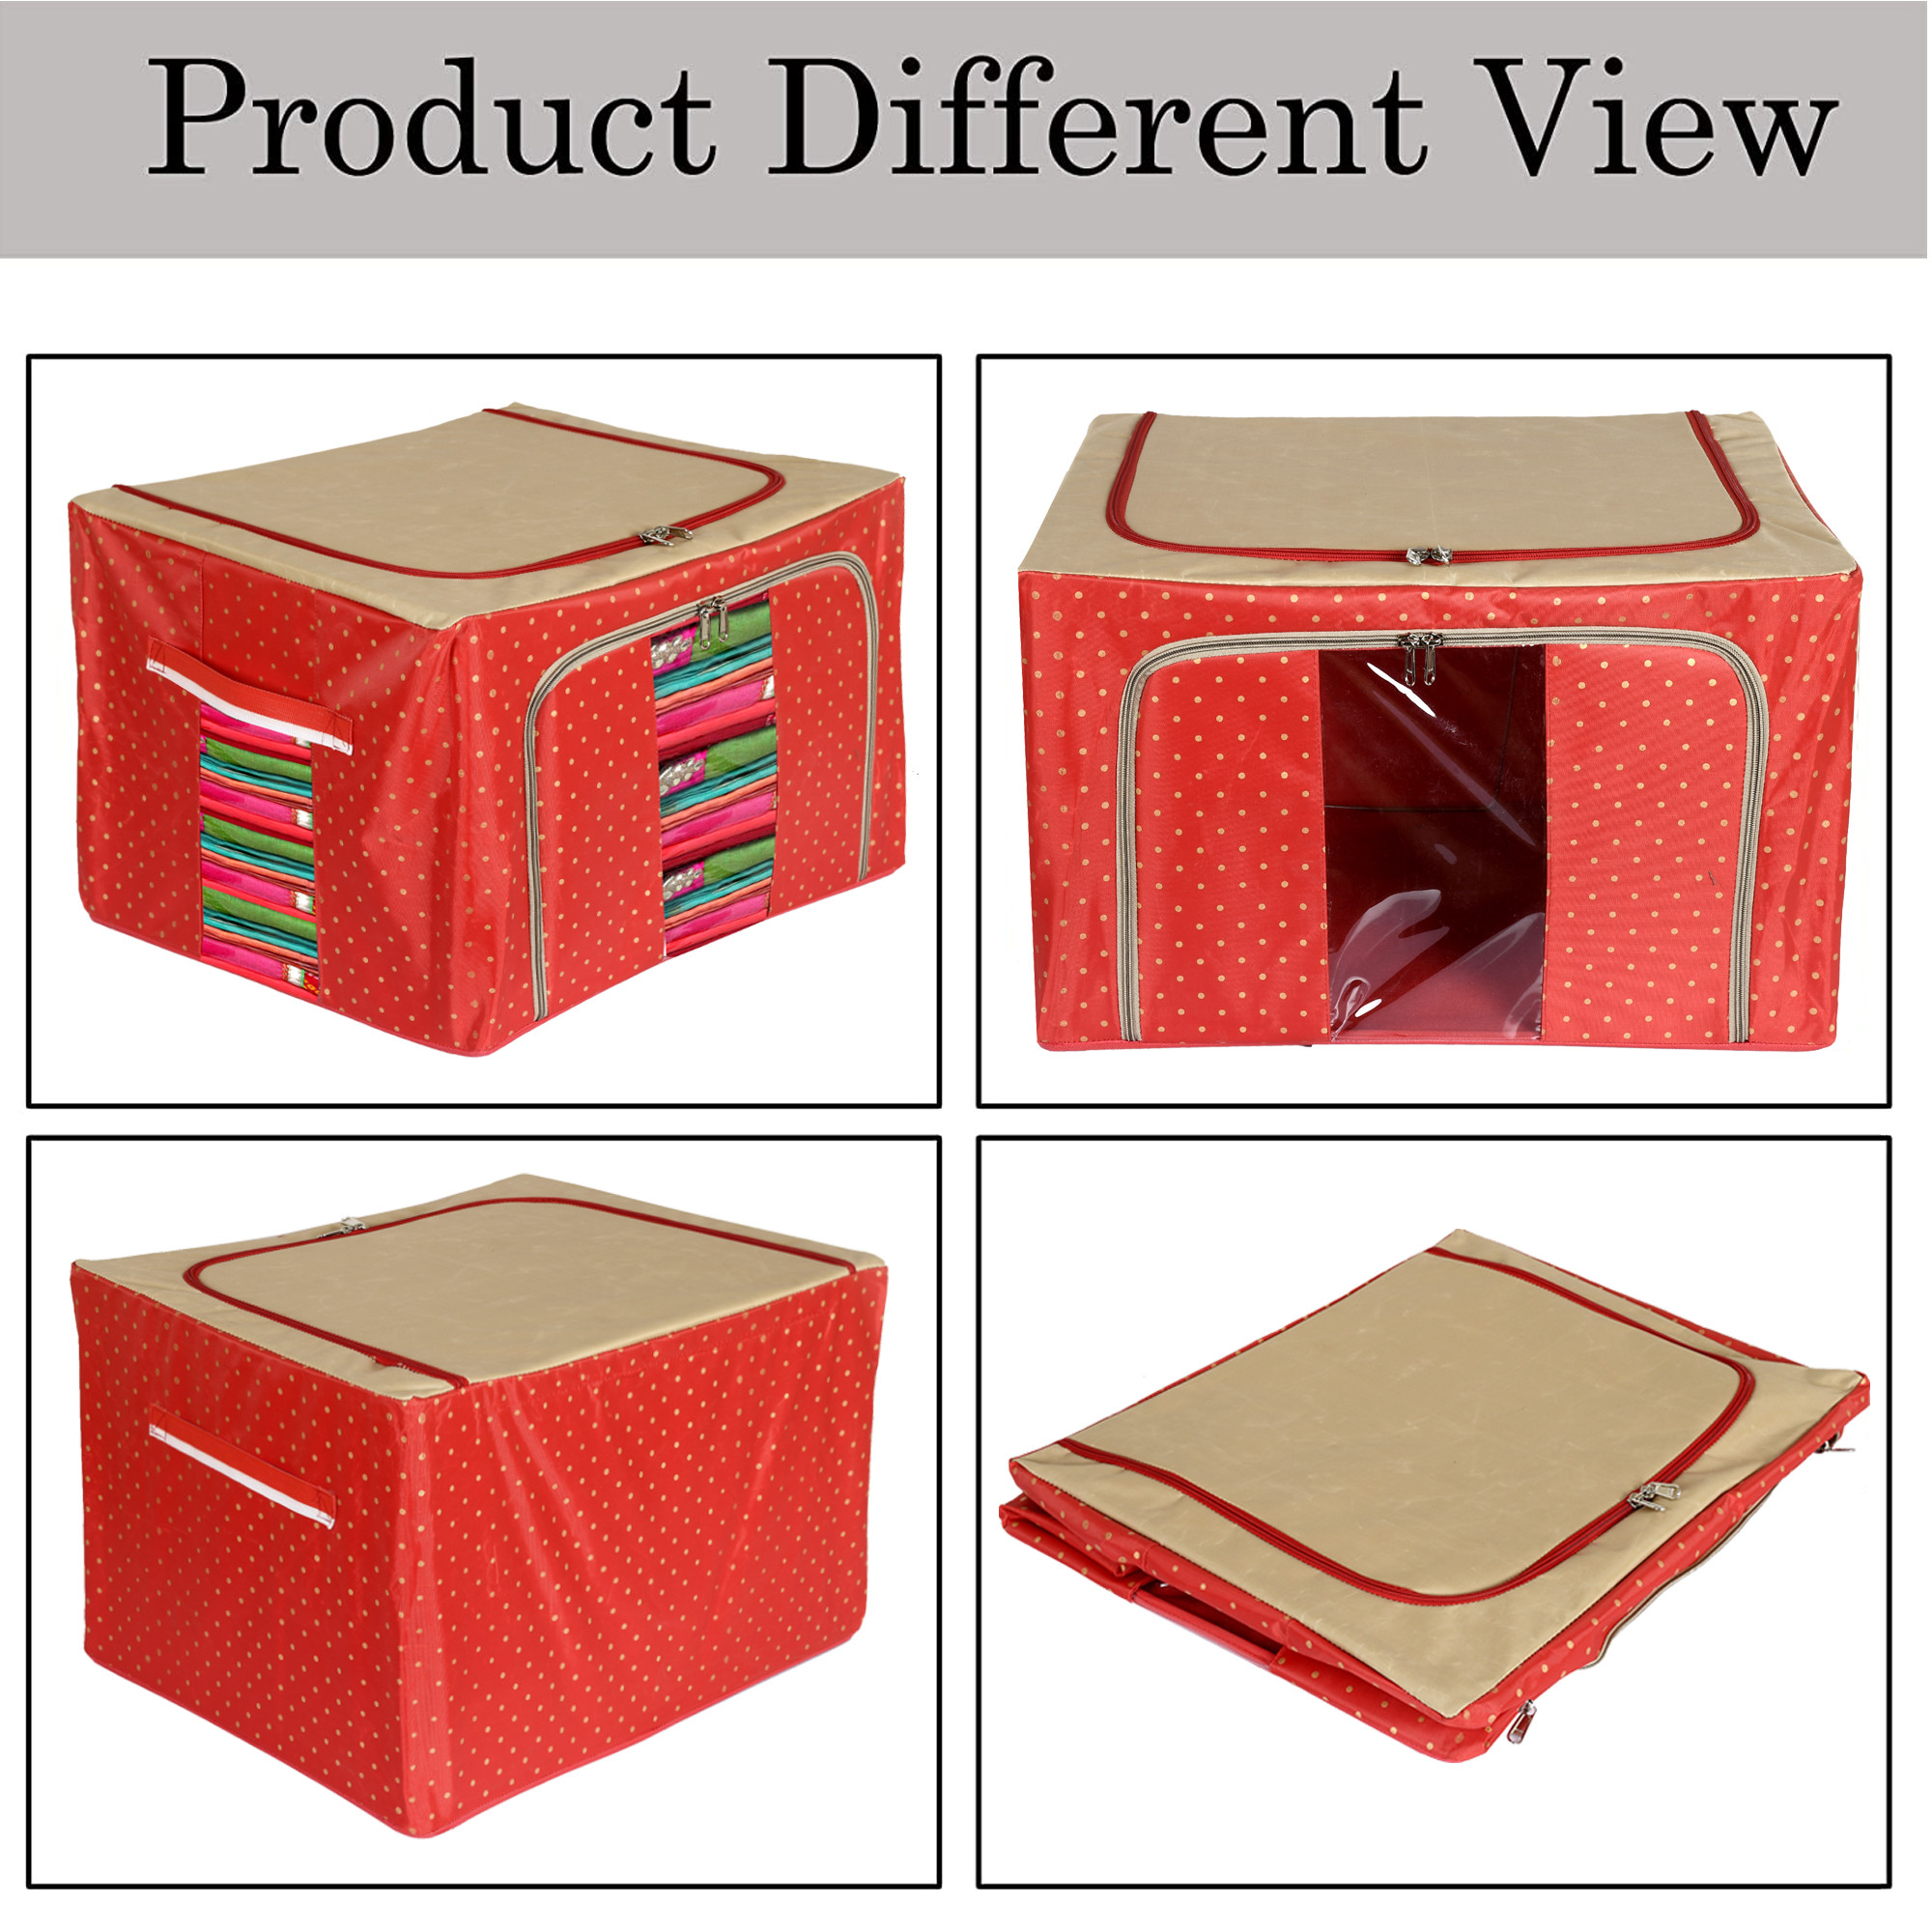 Kuber Industries Dot Printed Steel Frame Storage Box/Organizer For Clothing, Blankets, Bedding With Clear Window, 66Ltr. (Red & Brown)-44KM0245